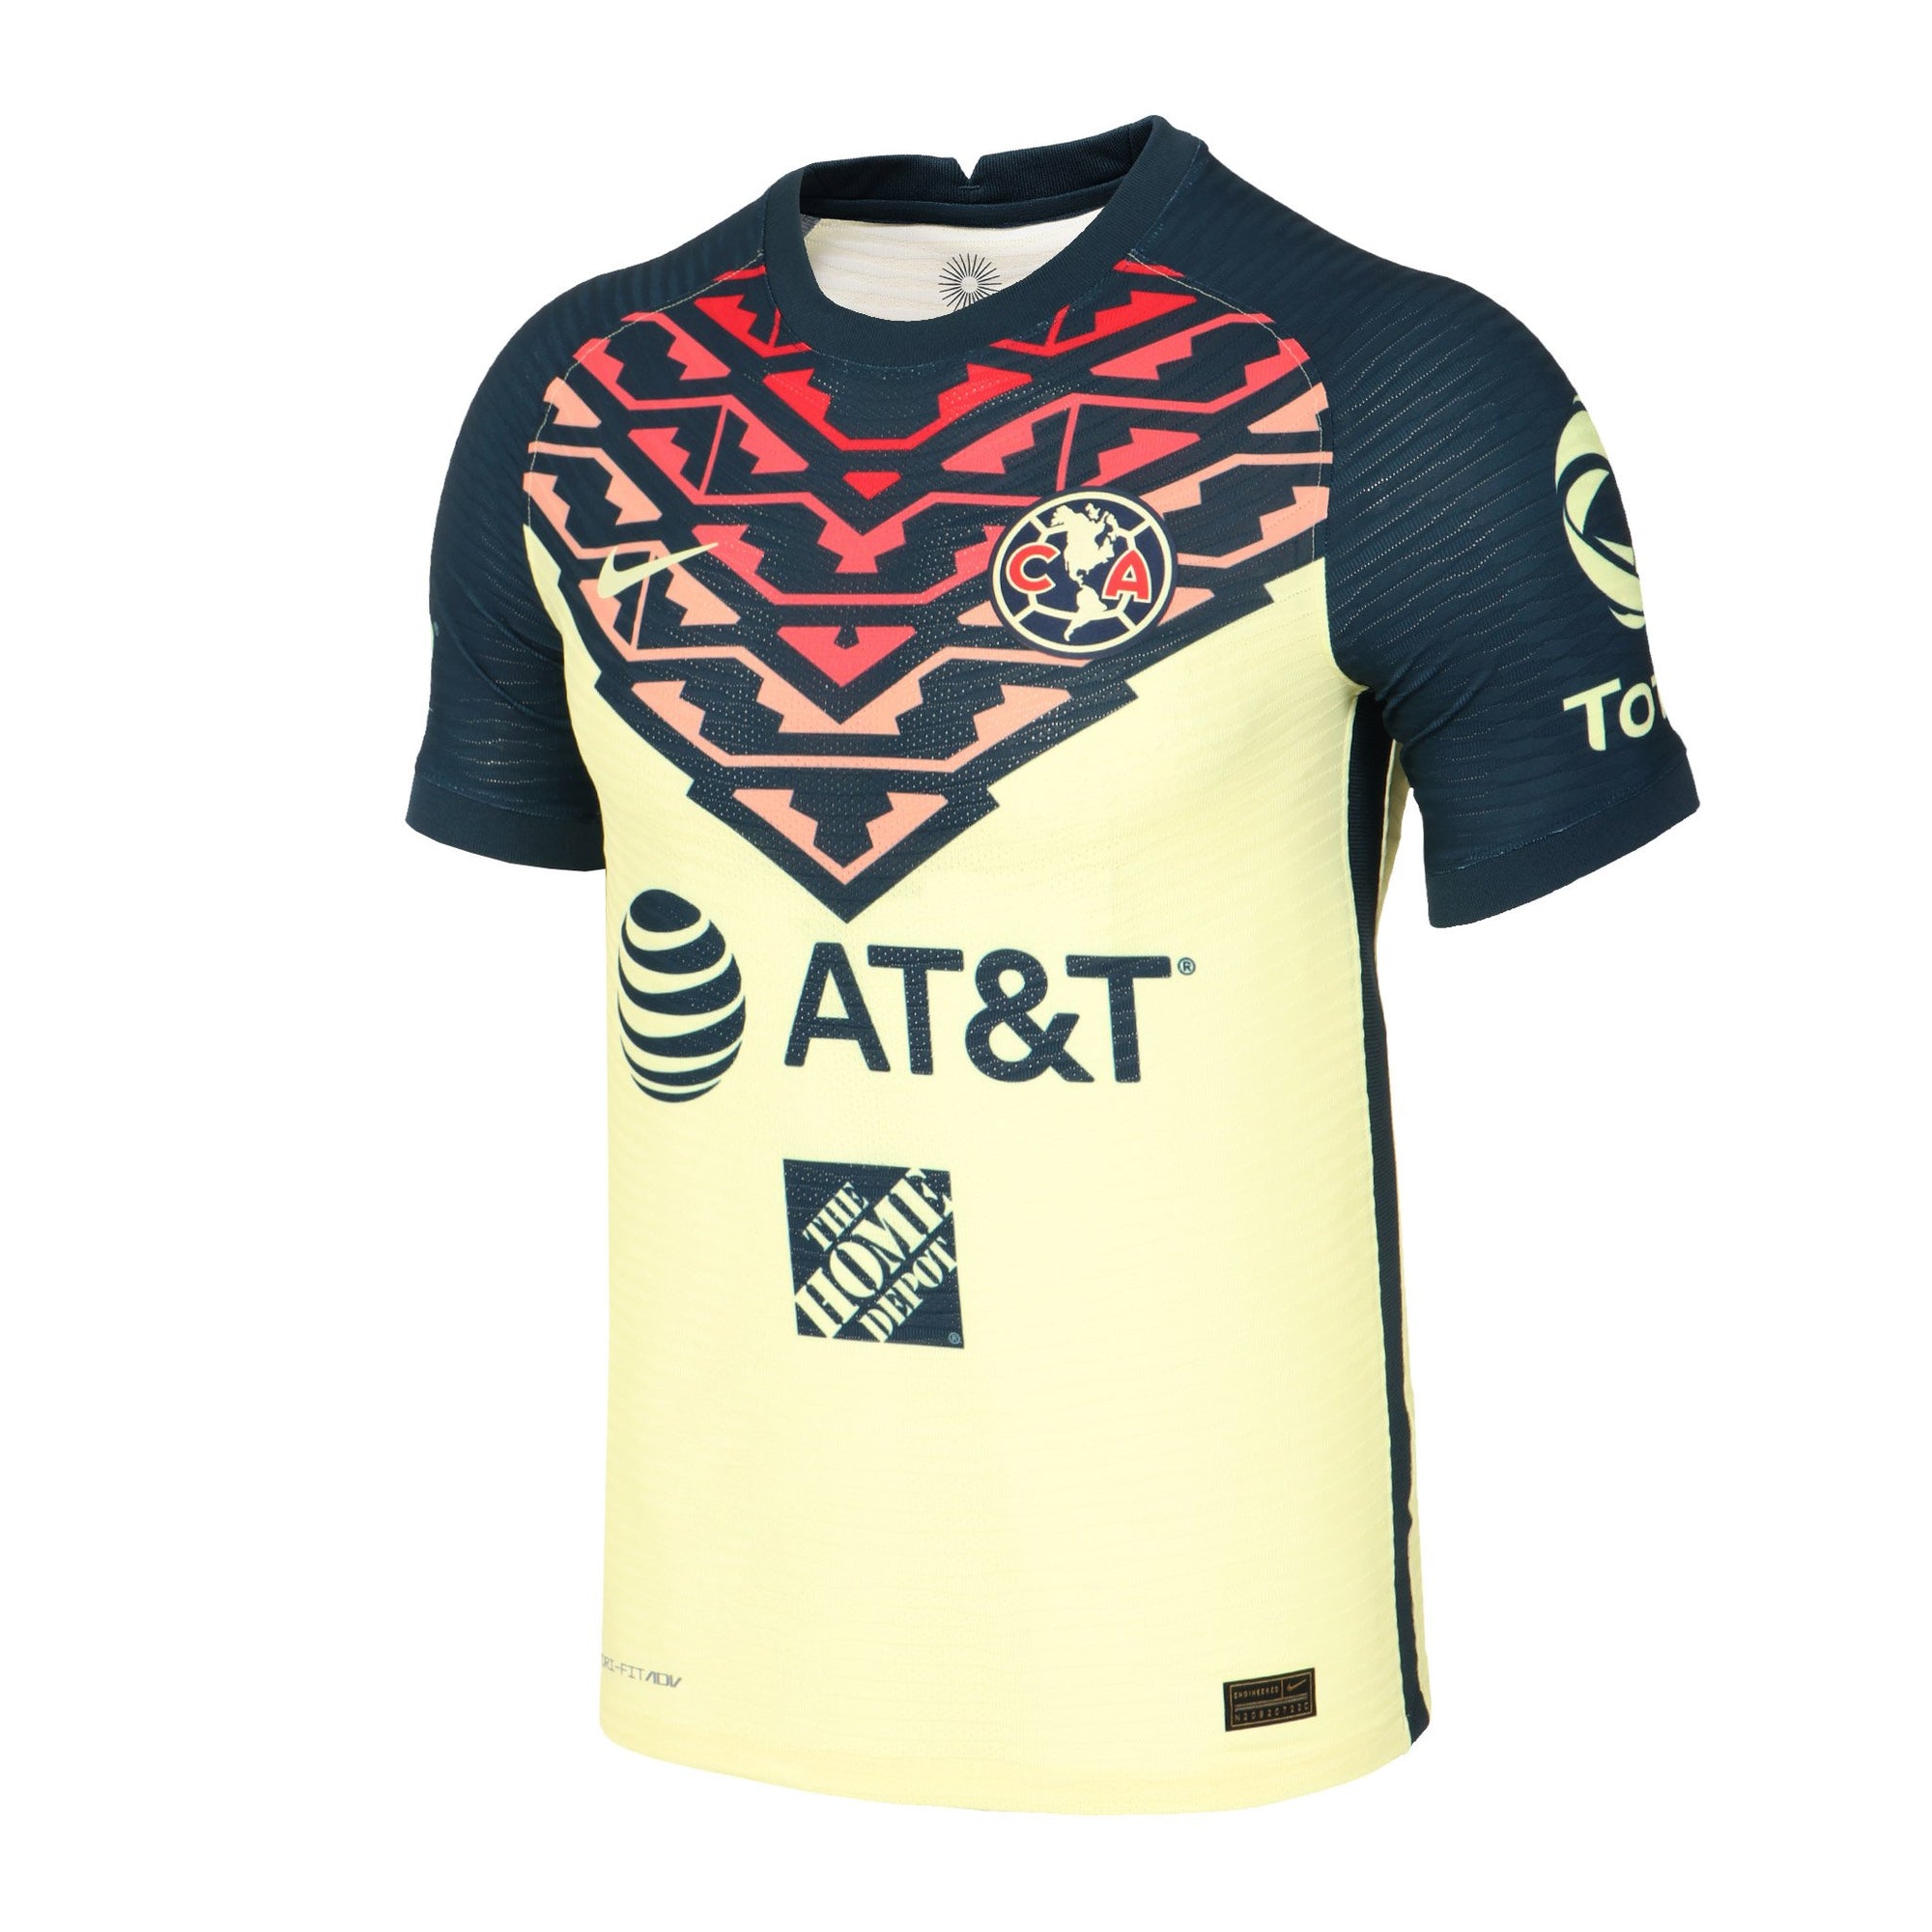 Club America Men's 21/22 Match Authentic Home Jersey